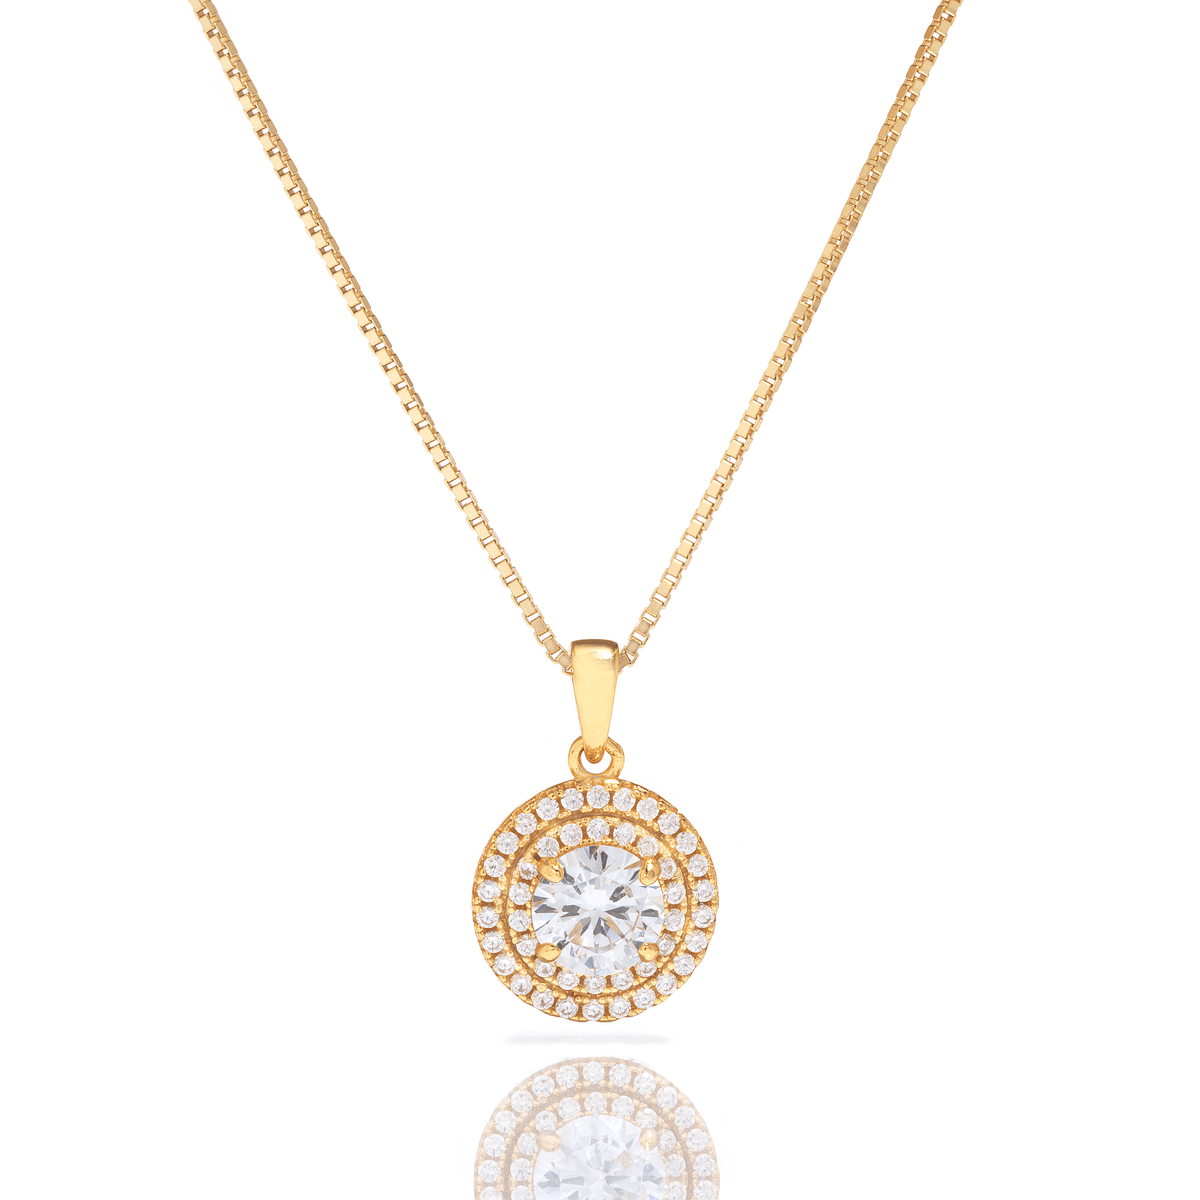 Lannette Round Crystal Necklace